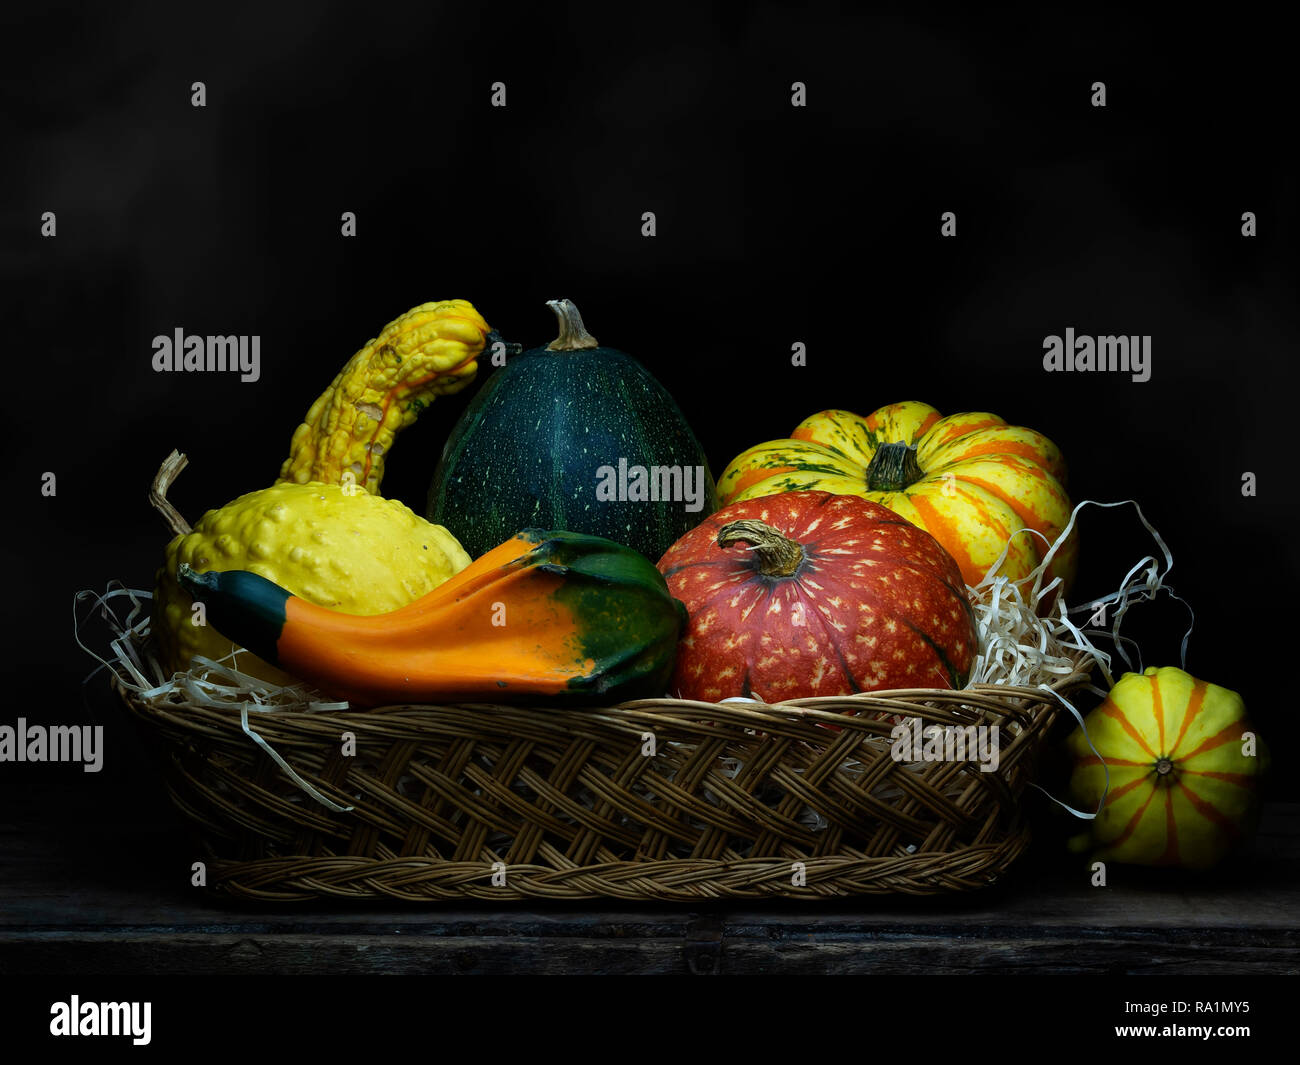 Ornamental gourds, pumpkins, winter squashes in basket. Still life. Chiaroscuro, baroque style light painting. Stock Photo